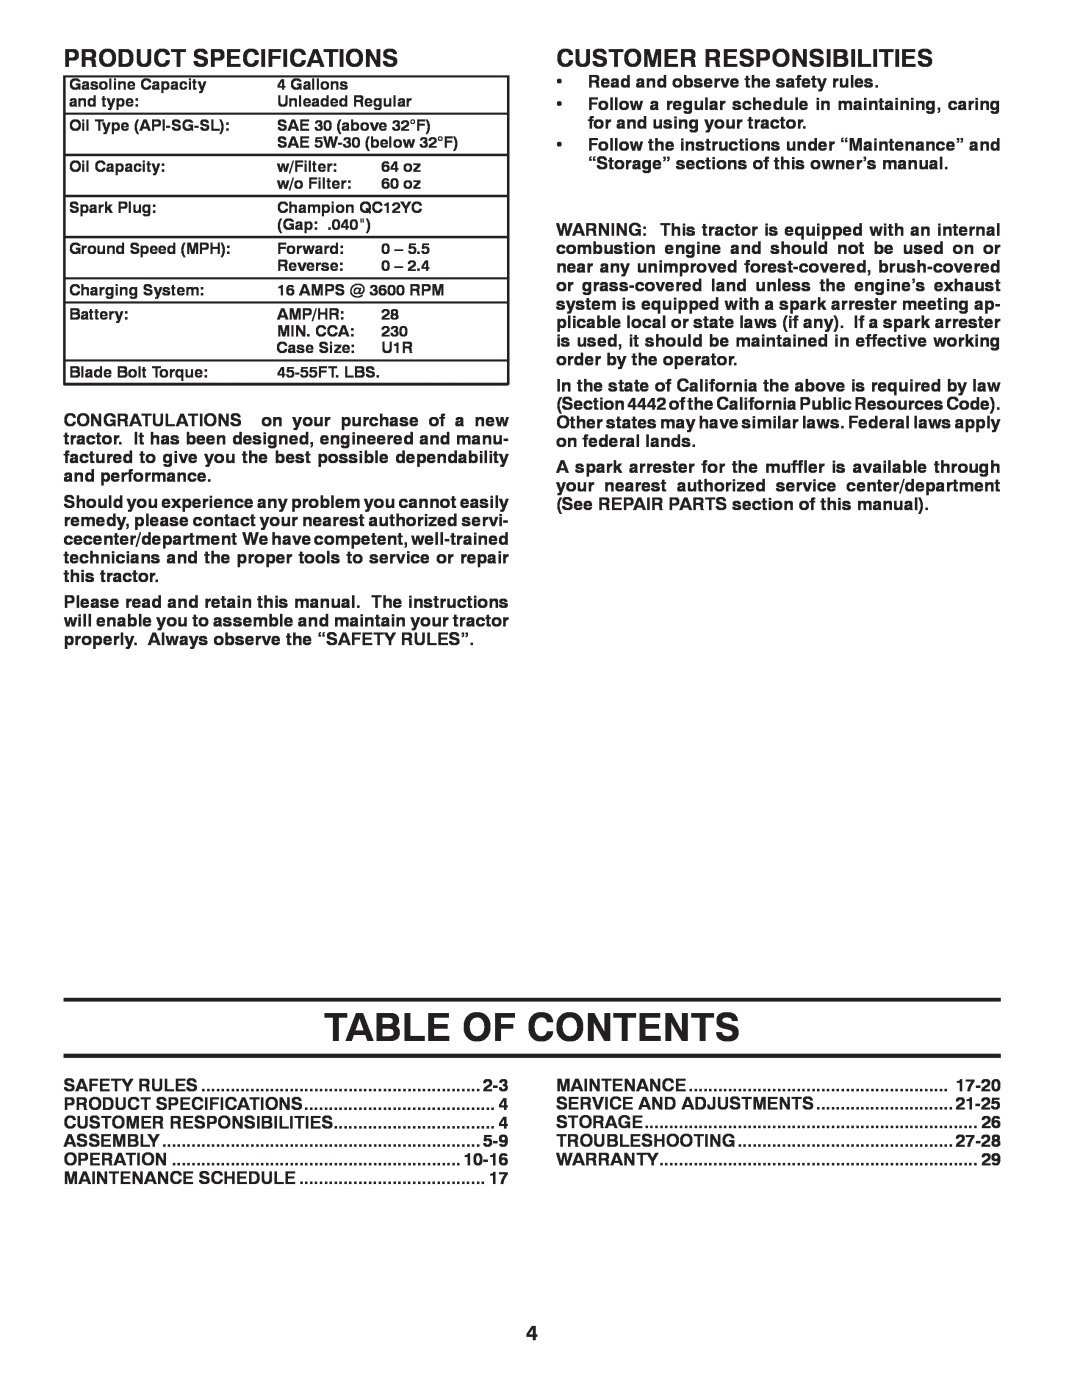 Poulan 96042006001 manual Table Of Contents, Product Specifications, Customer Responsibilities 